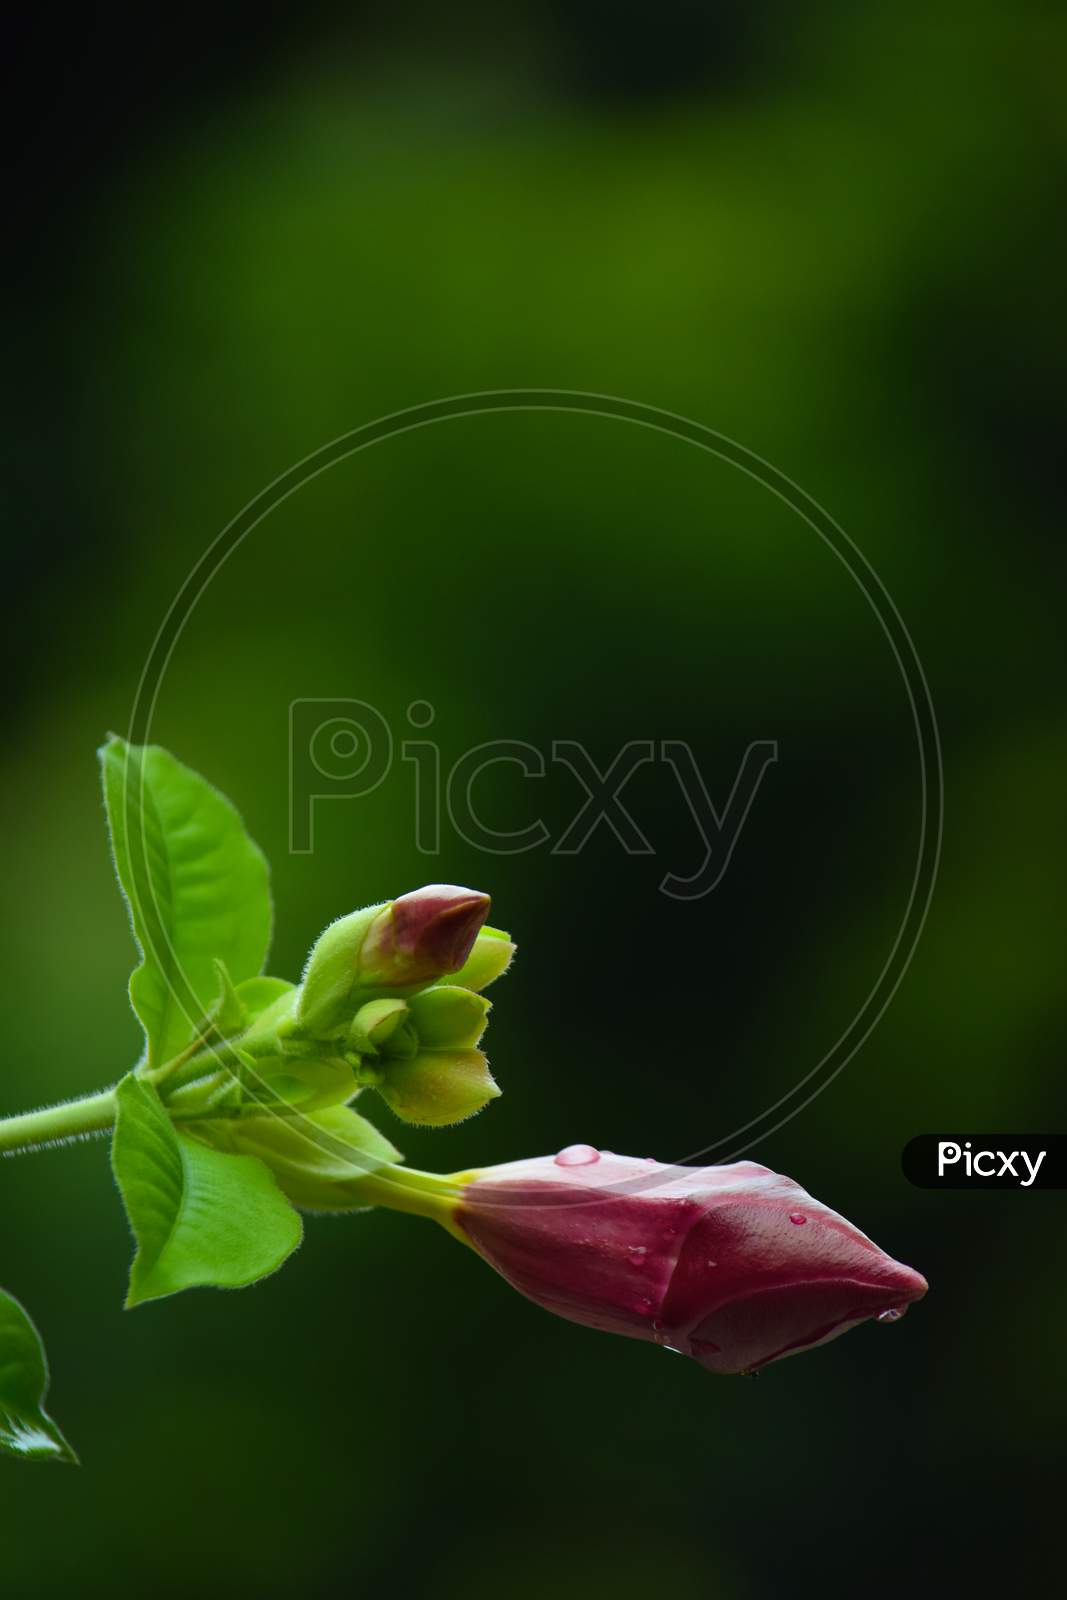 Beautiful Pink Color Flower At Outdoor, Raindrops On Flower, Blurred Background, Green